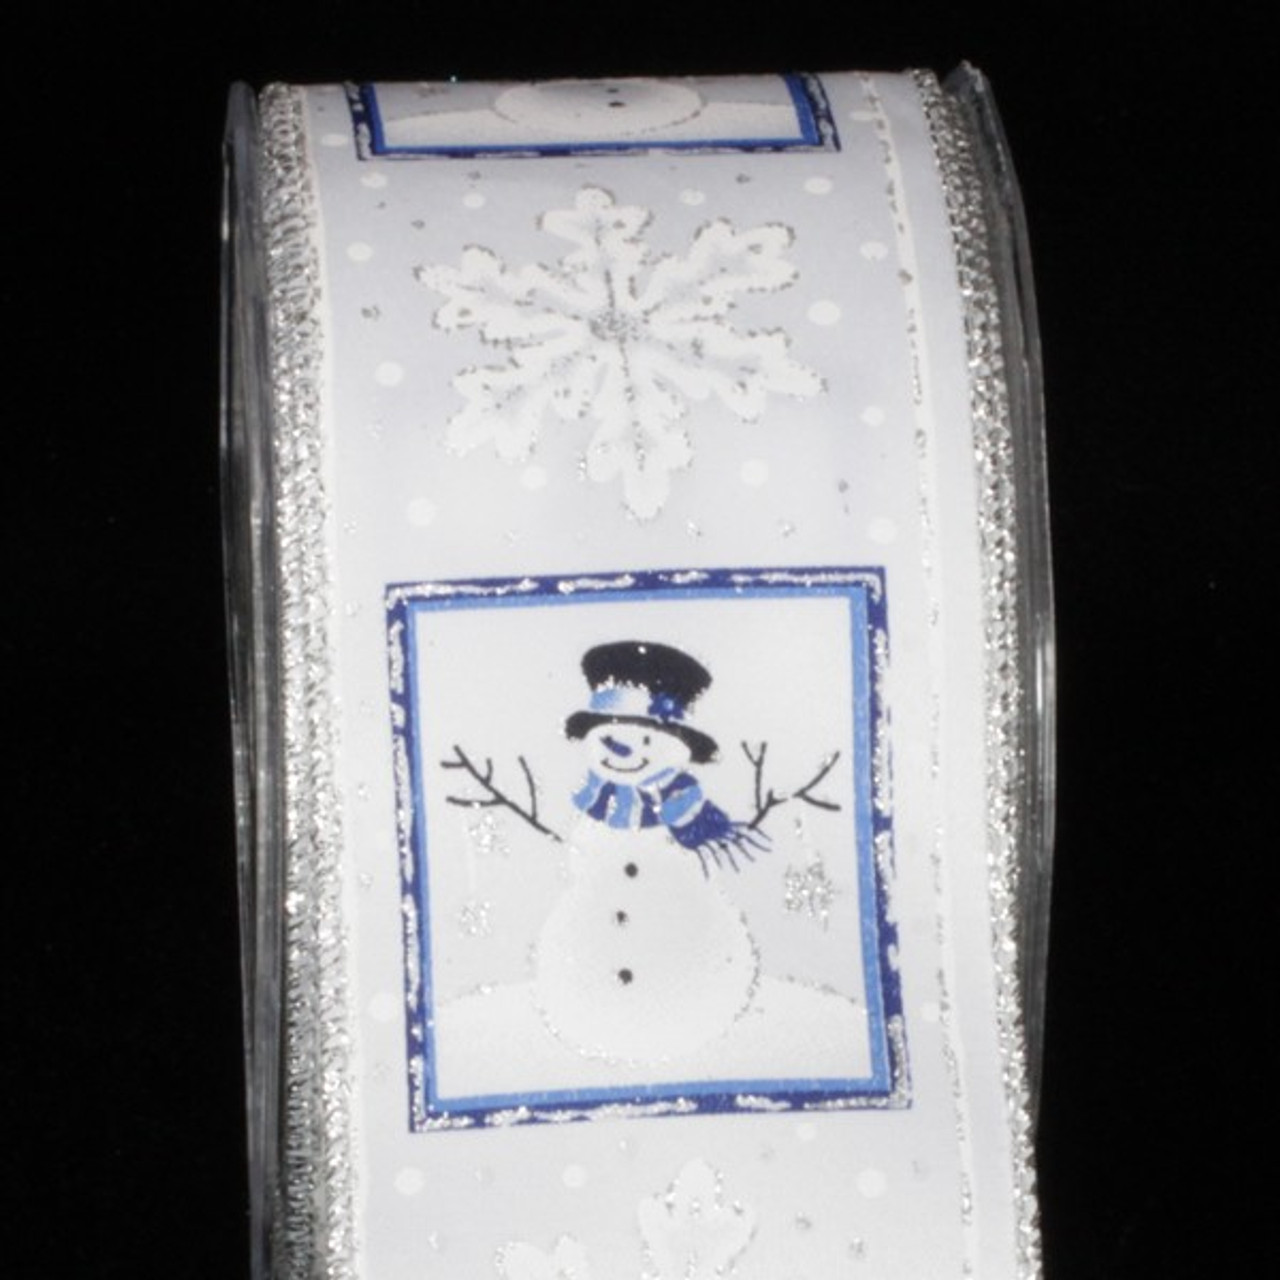 Blue & White Snowflakes Christmas Wired Craft Ribbon 2.5 x 16 Yards